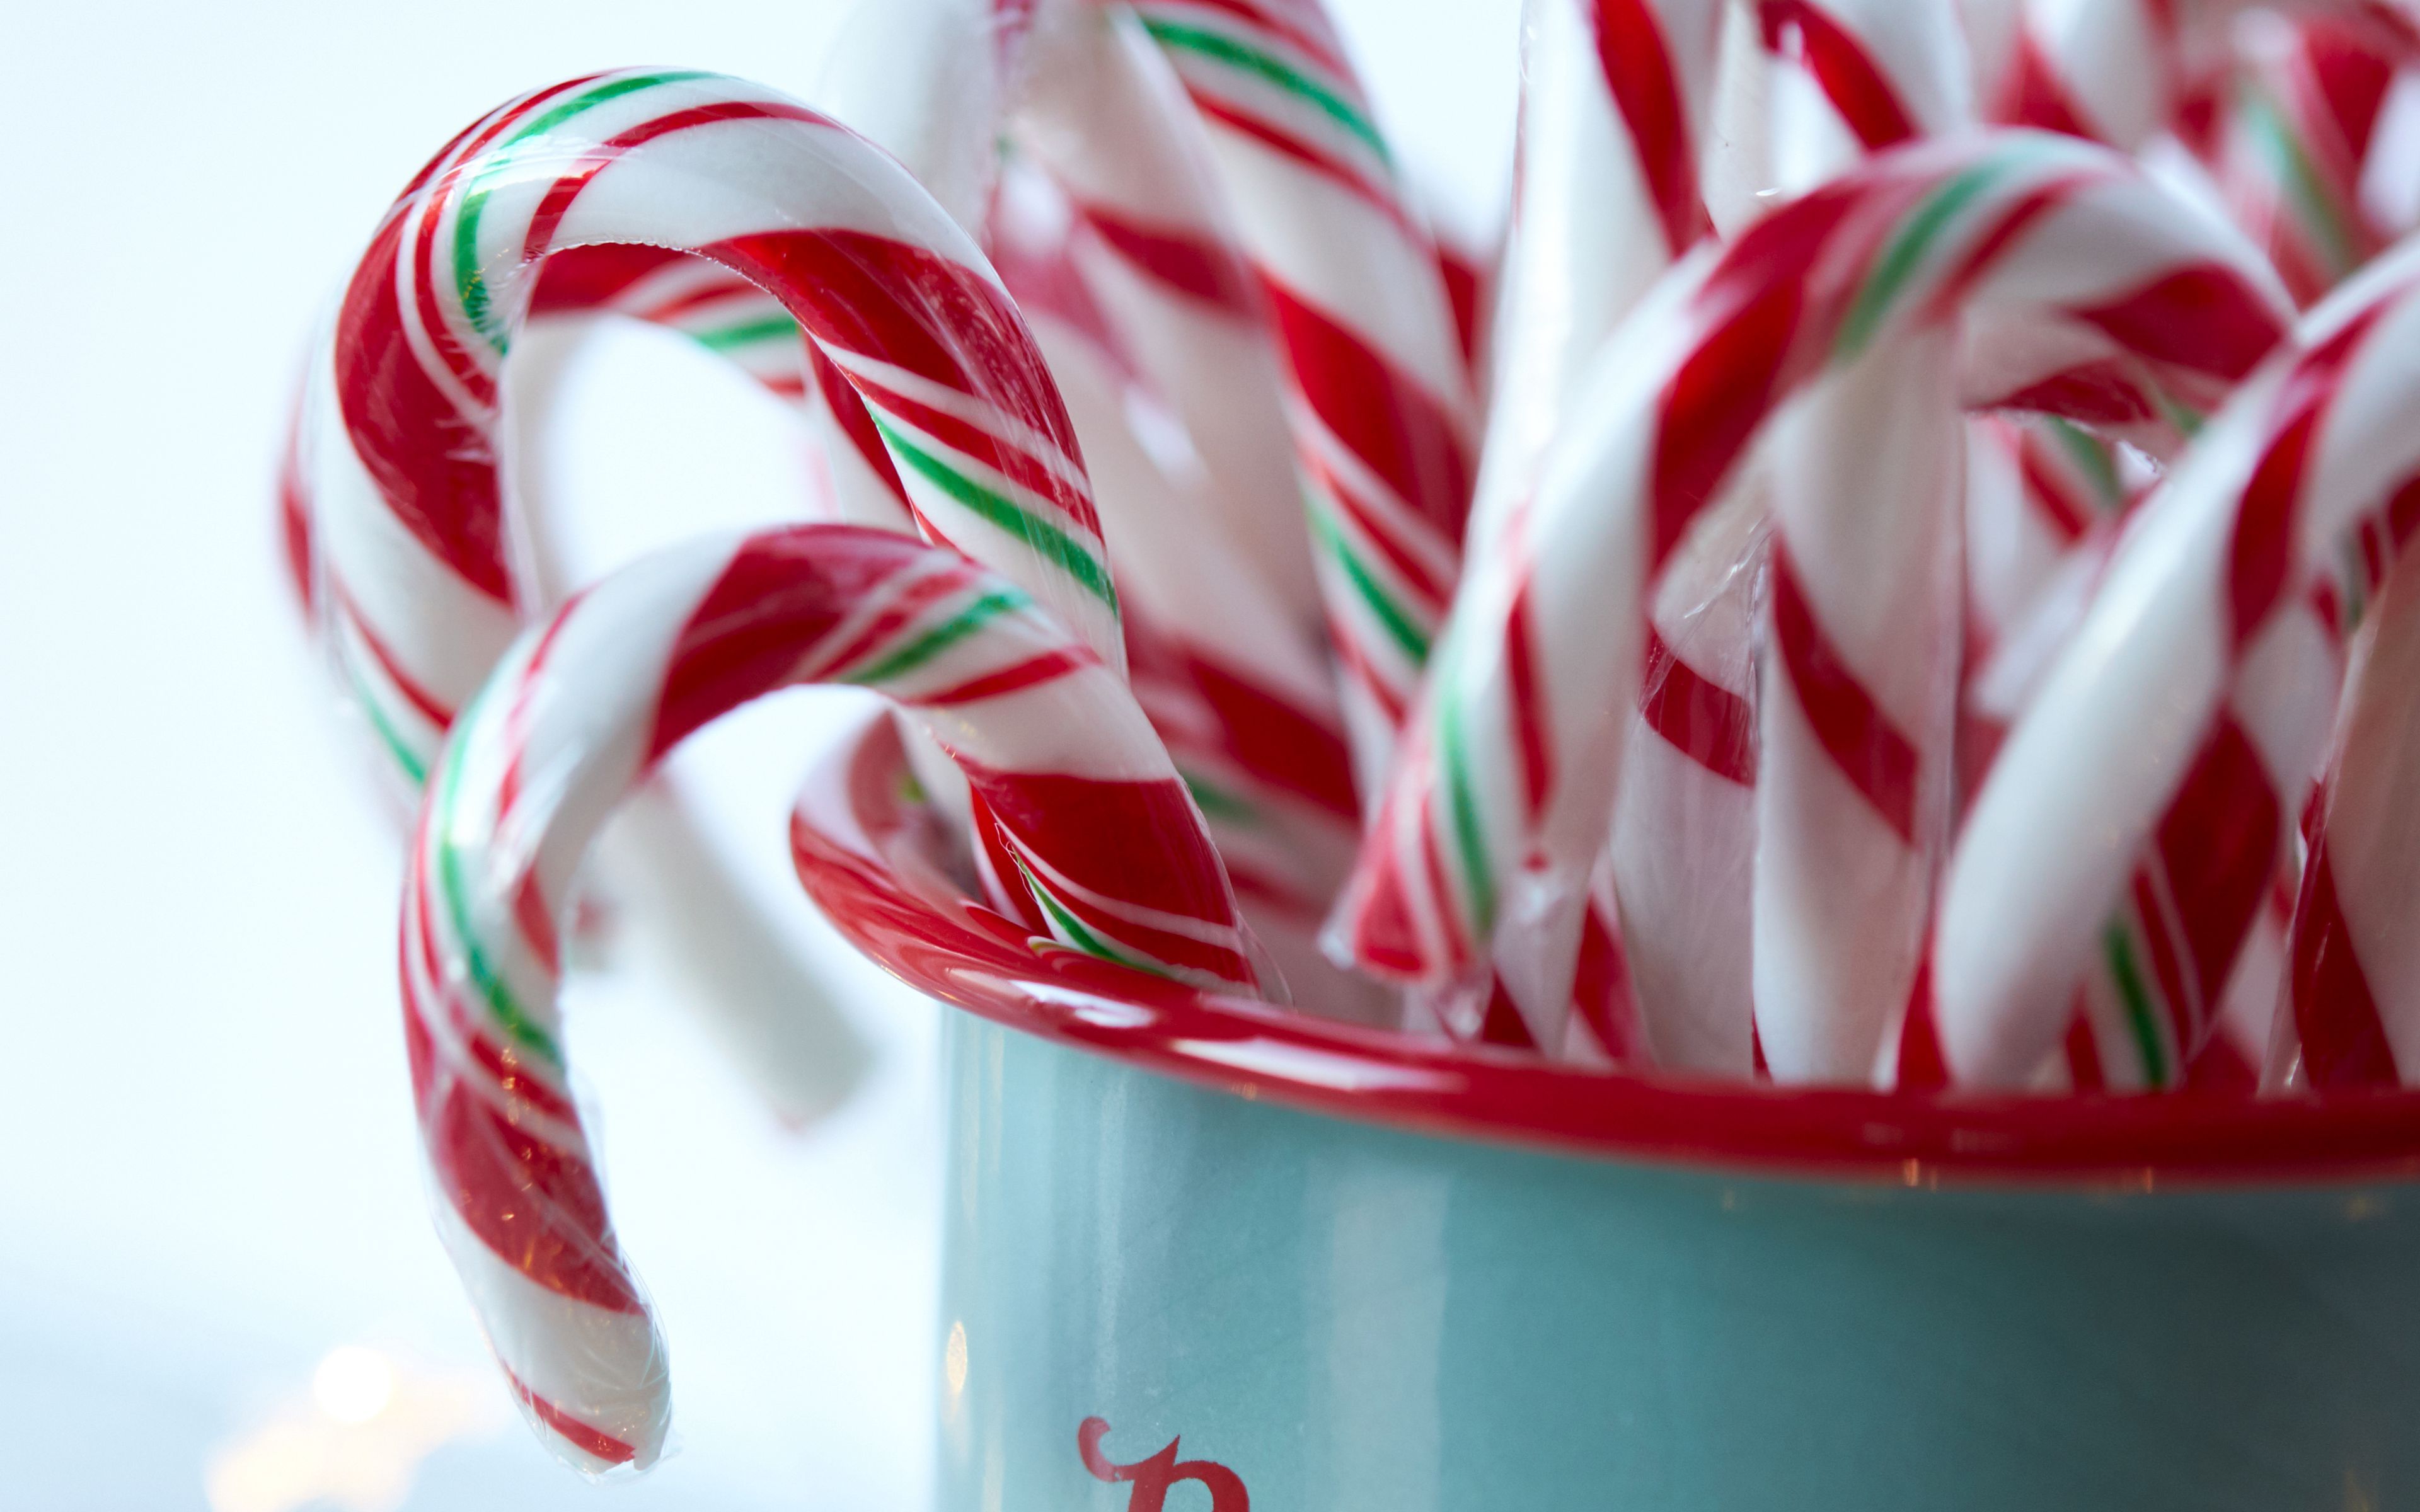 Download wallpaper 3840x2400 candy canes, candy, mug, new year, christmas 4k ultra HD 16:10 HD background